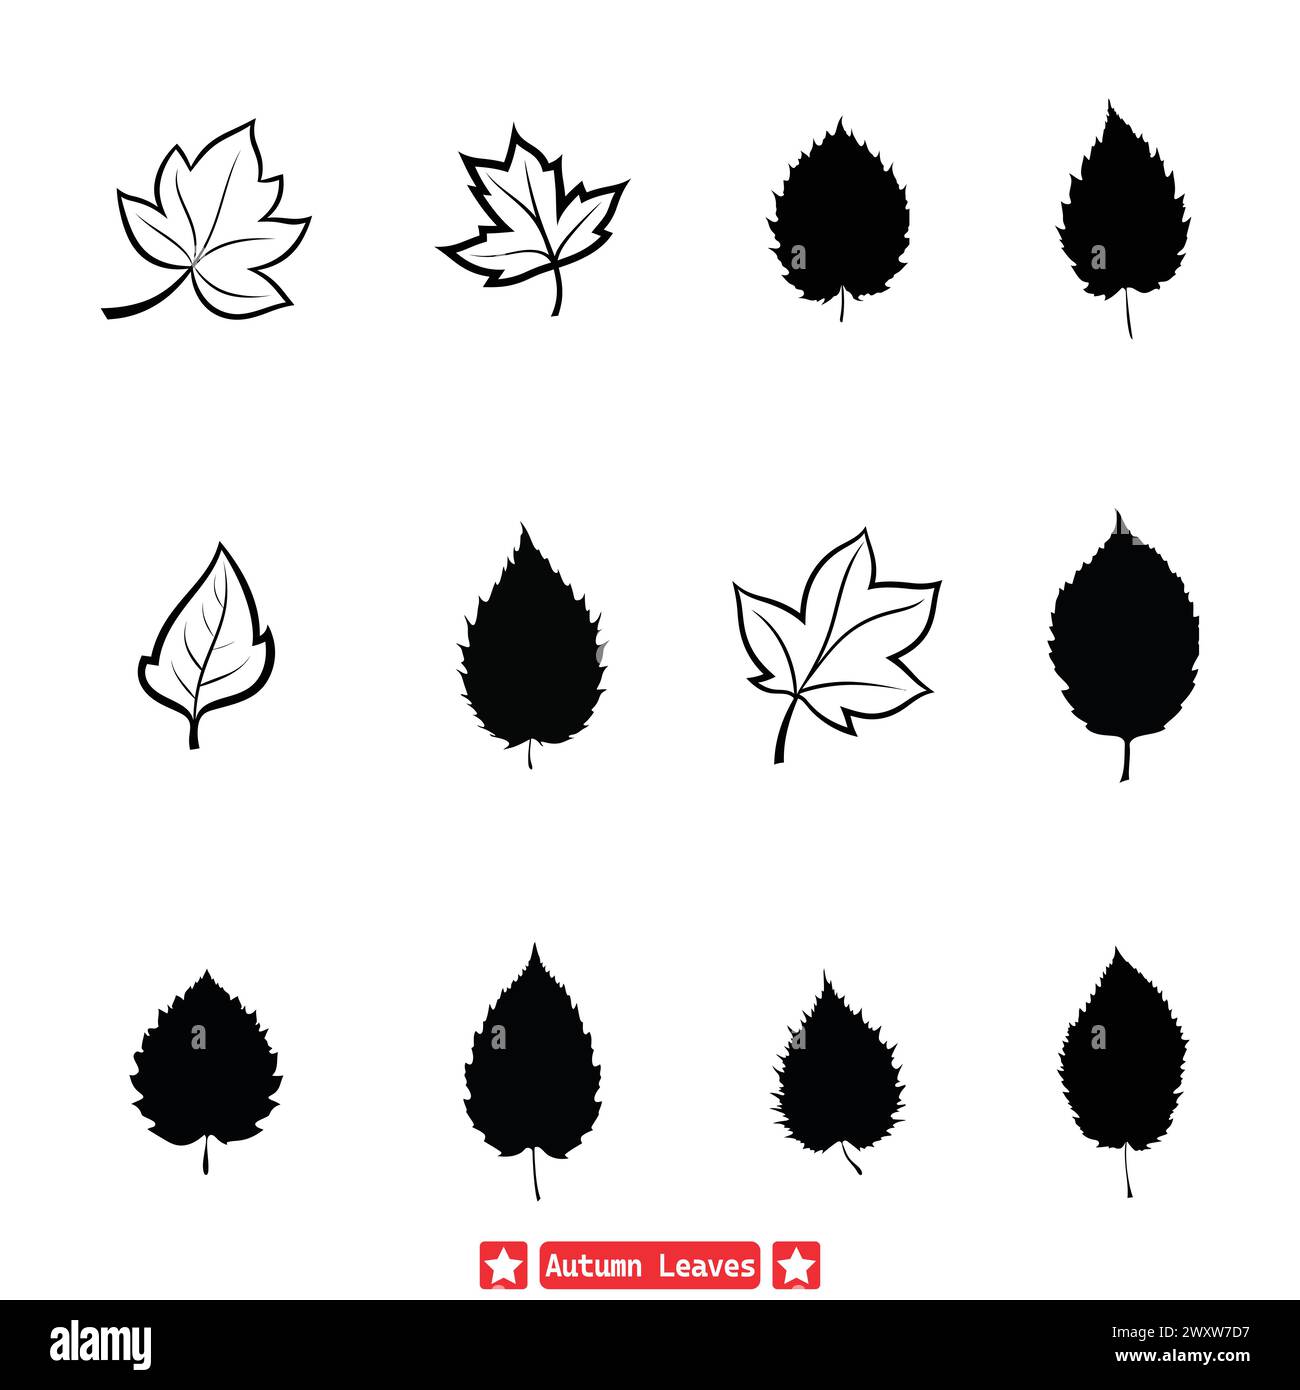 Whimsical Autumn Leaves Silhouetted Foliage Vector Pack Stock Vector